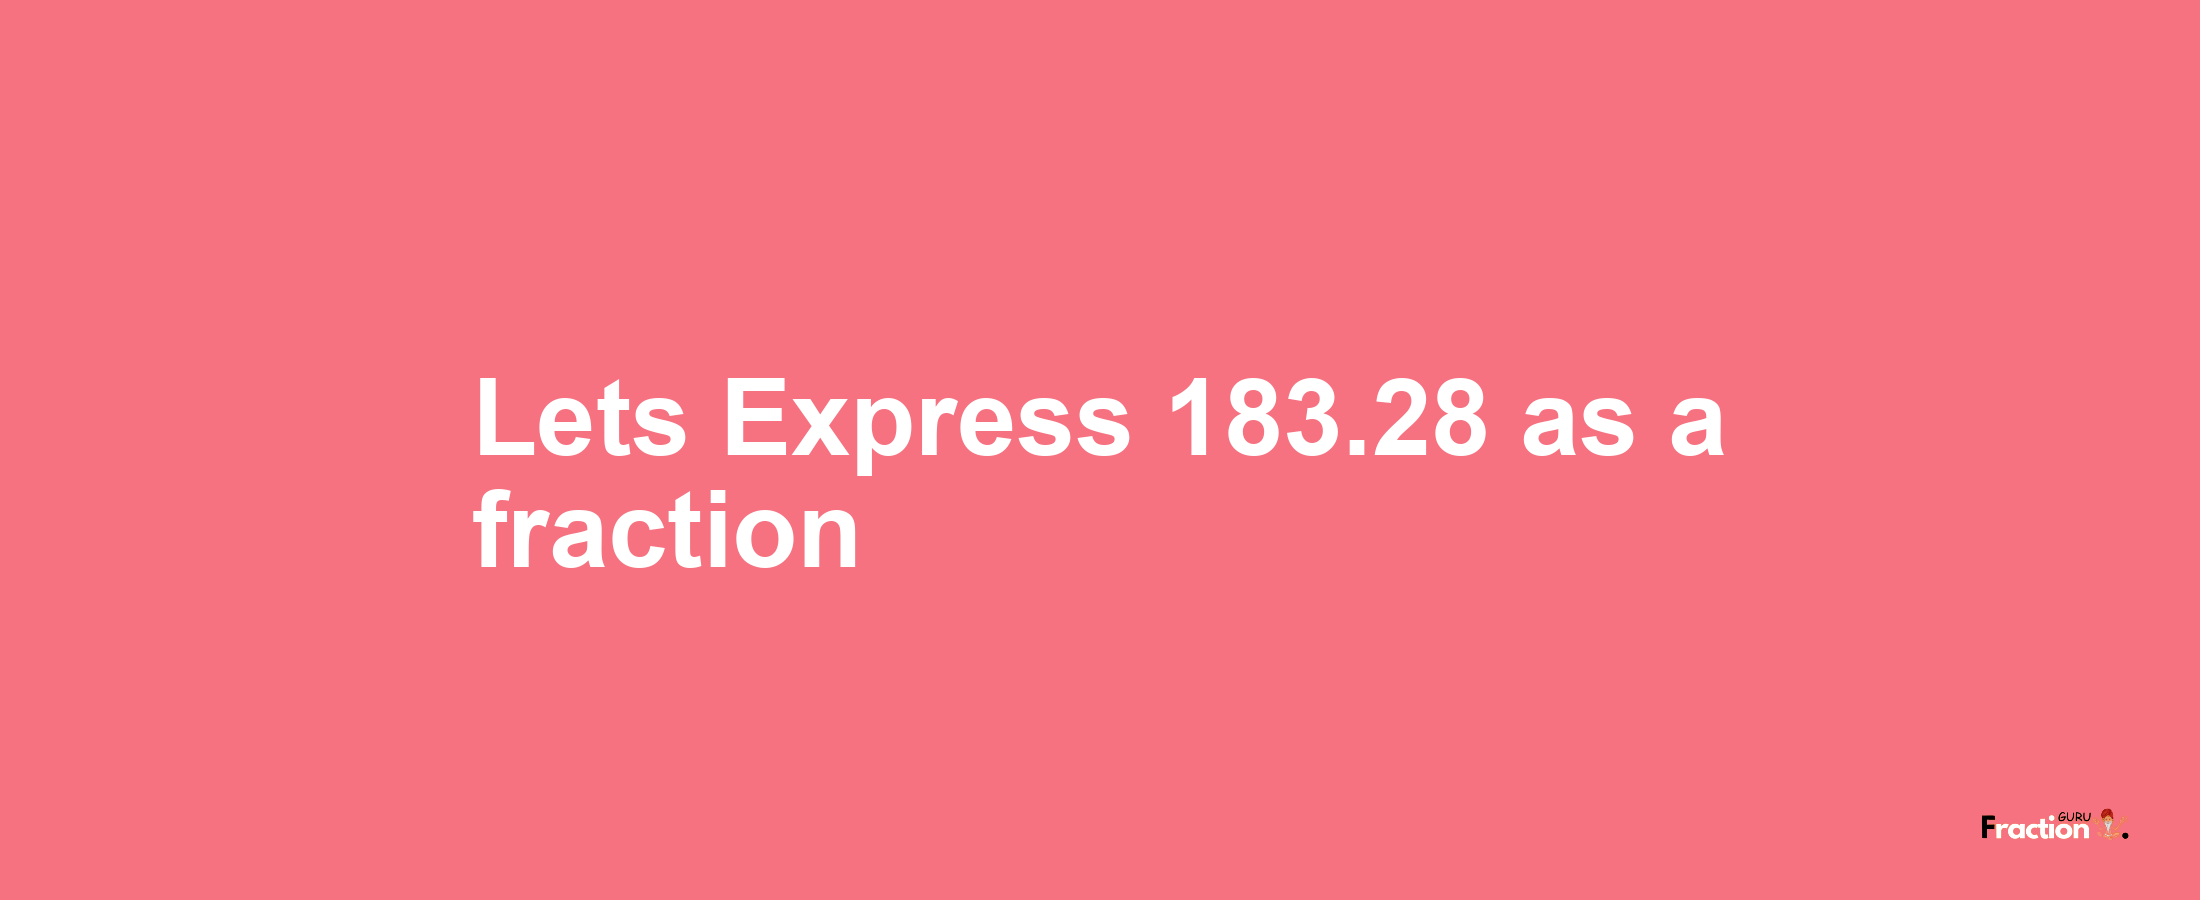 Lets Express 183.28 as afraction